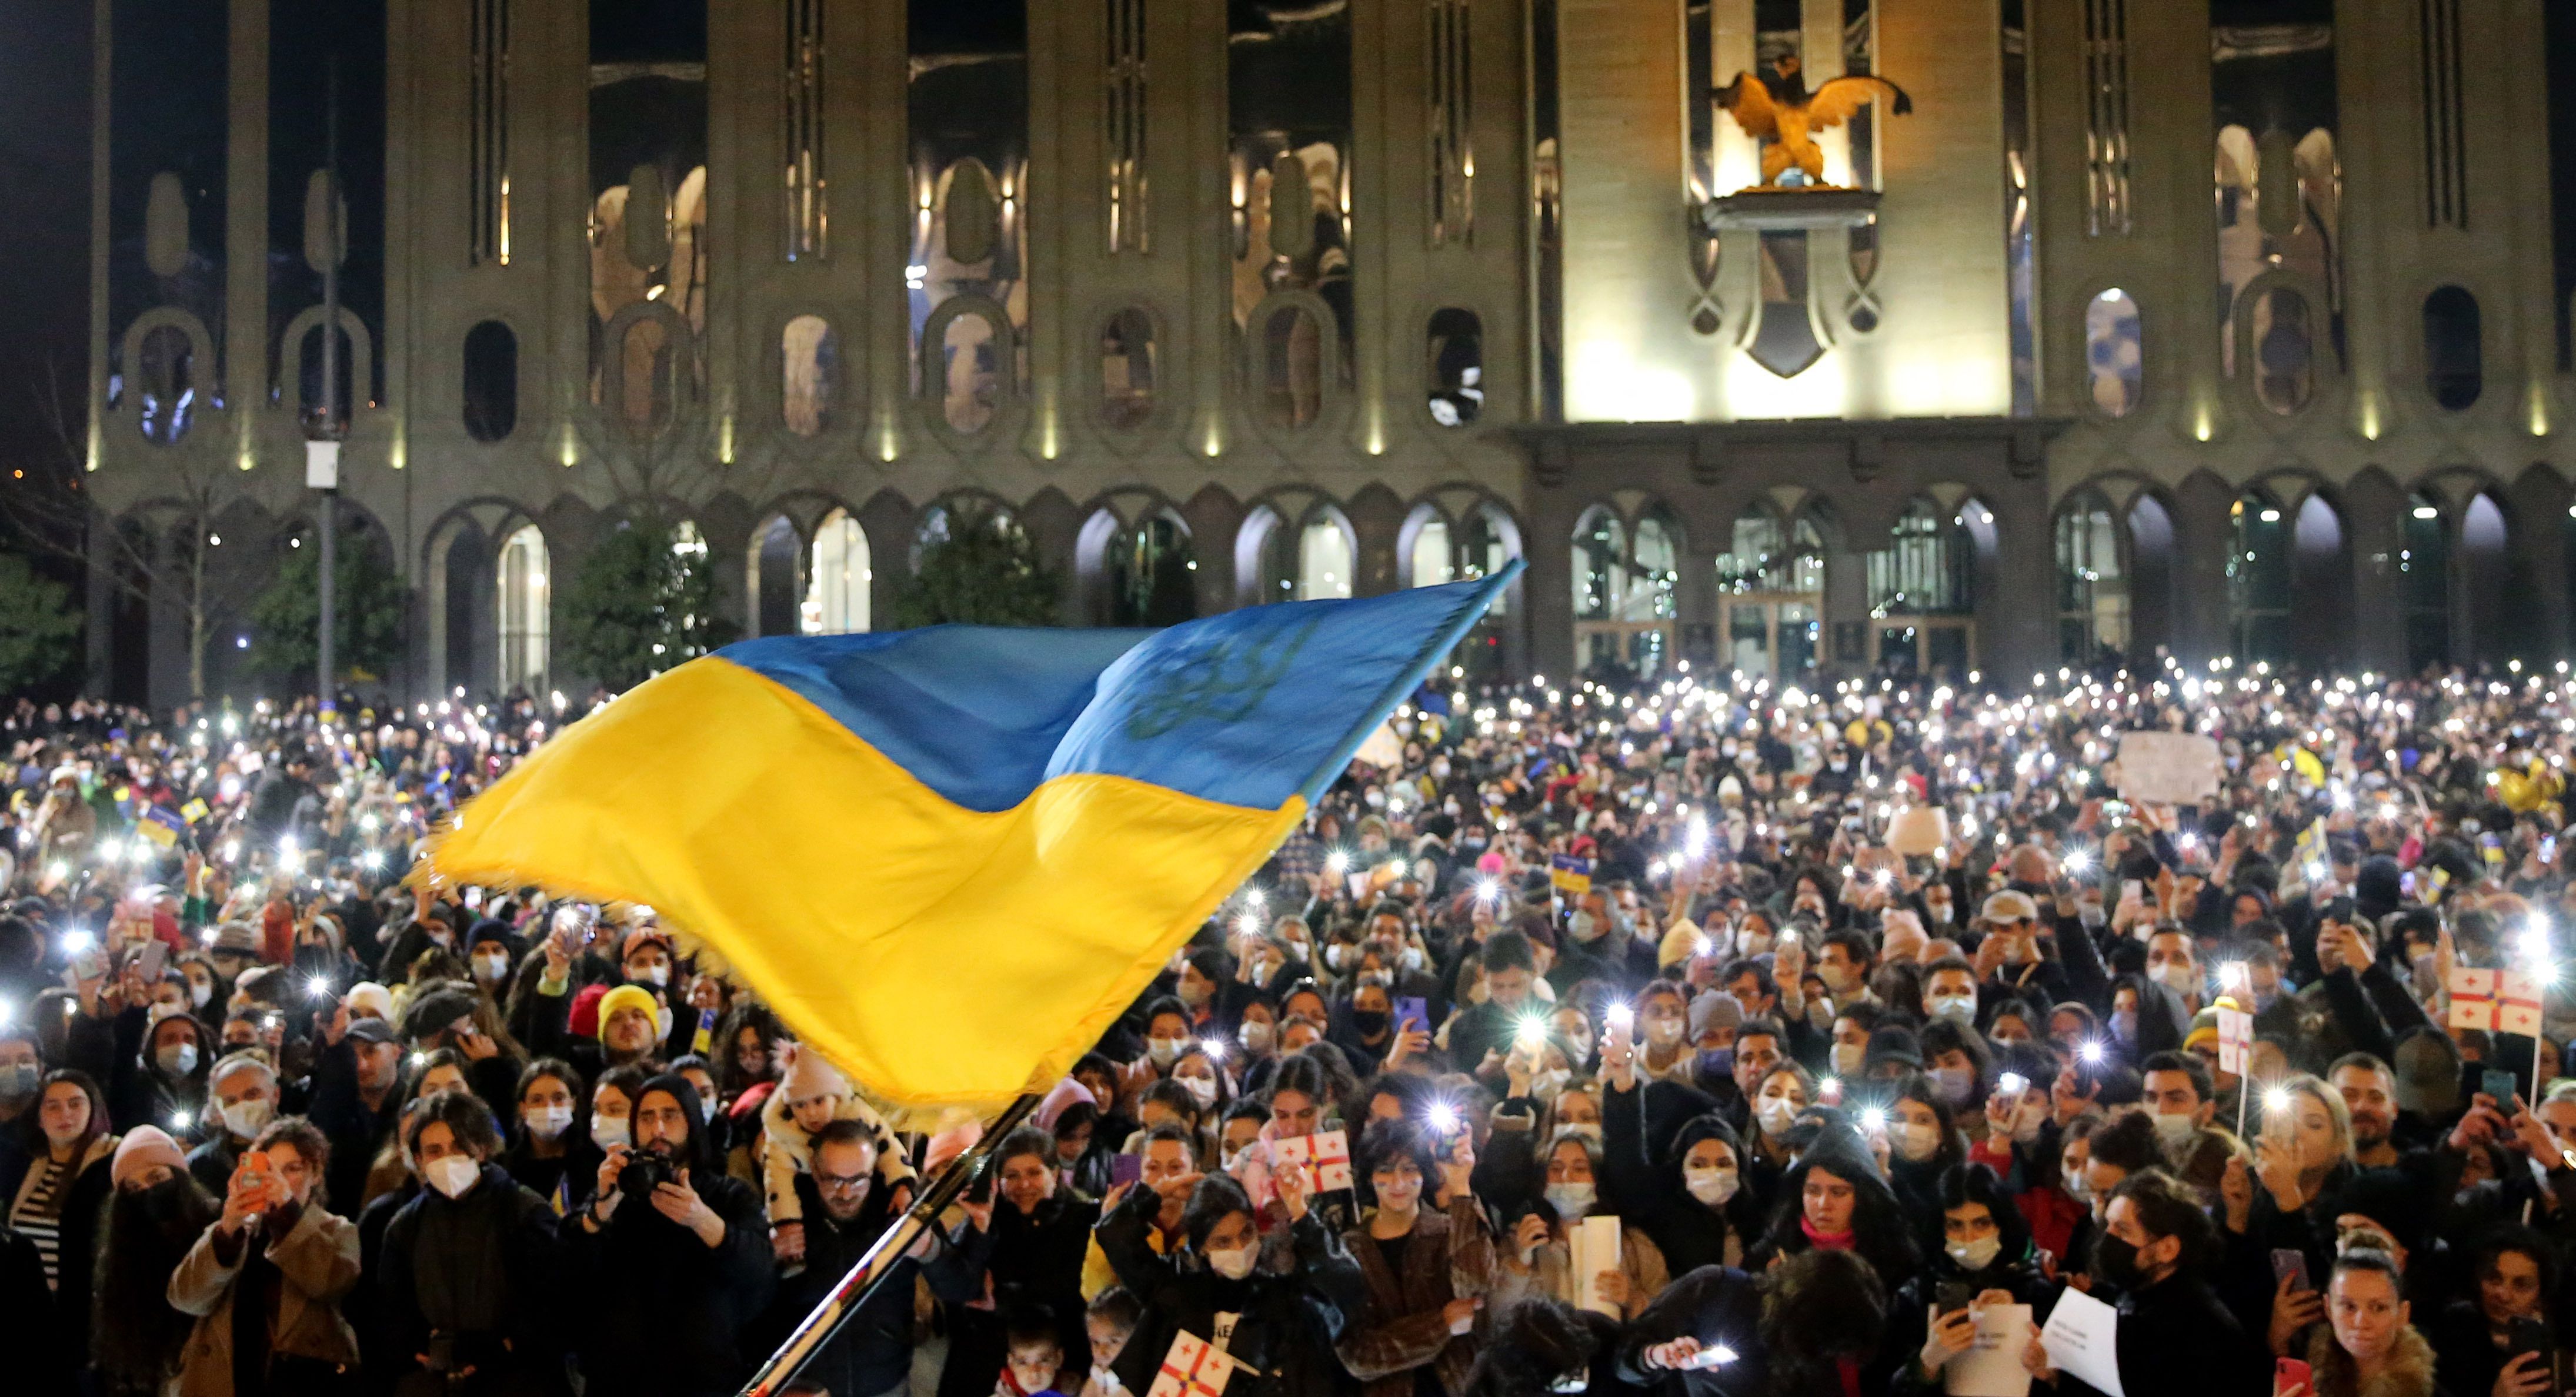 Photo of a large Ukraine flag being waved in the air in front of a crowd of people holding lights